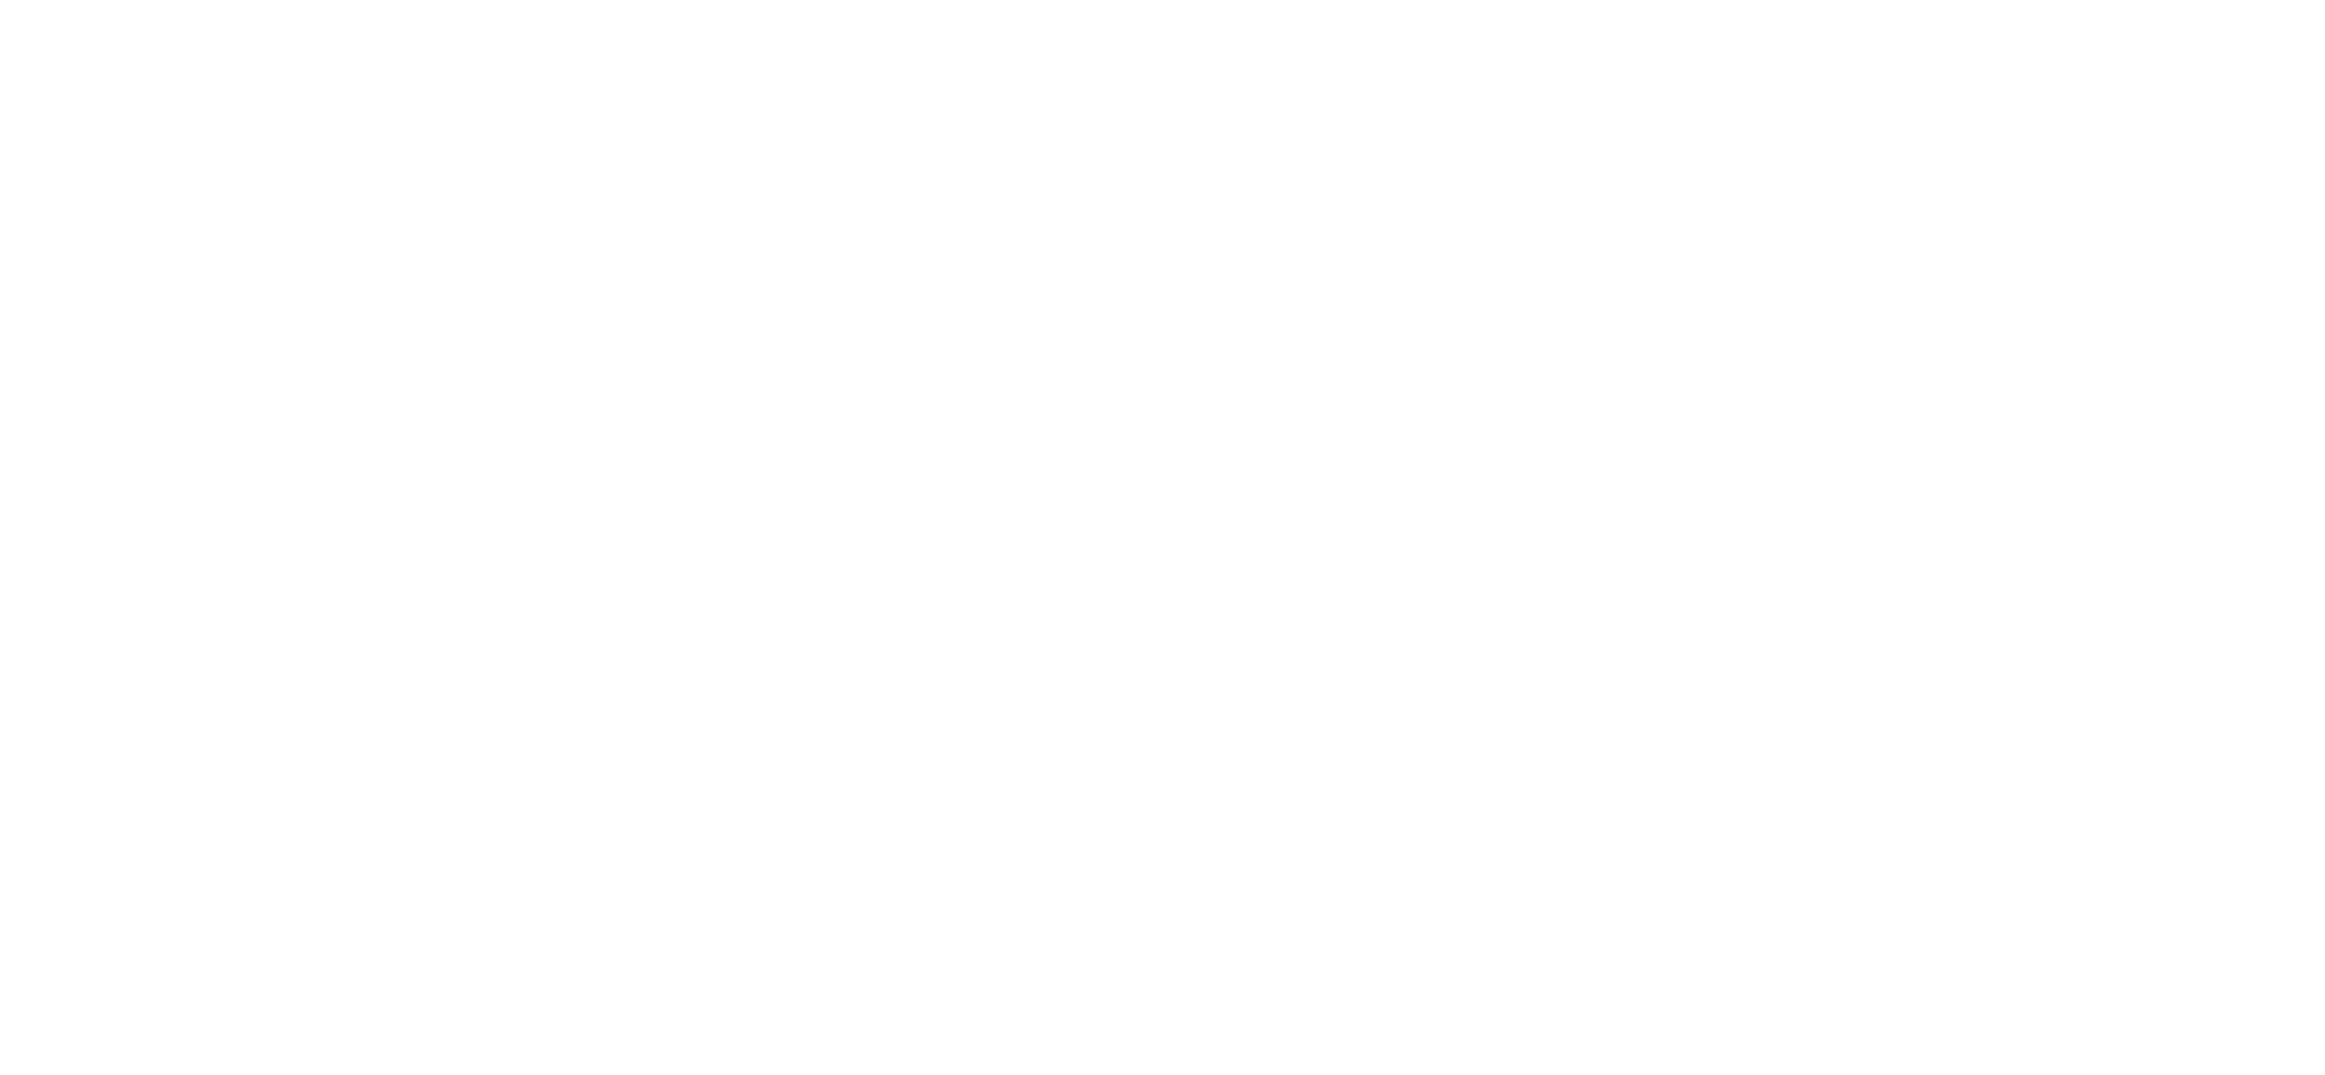 Muddlers_Identity_ copy 2.png